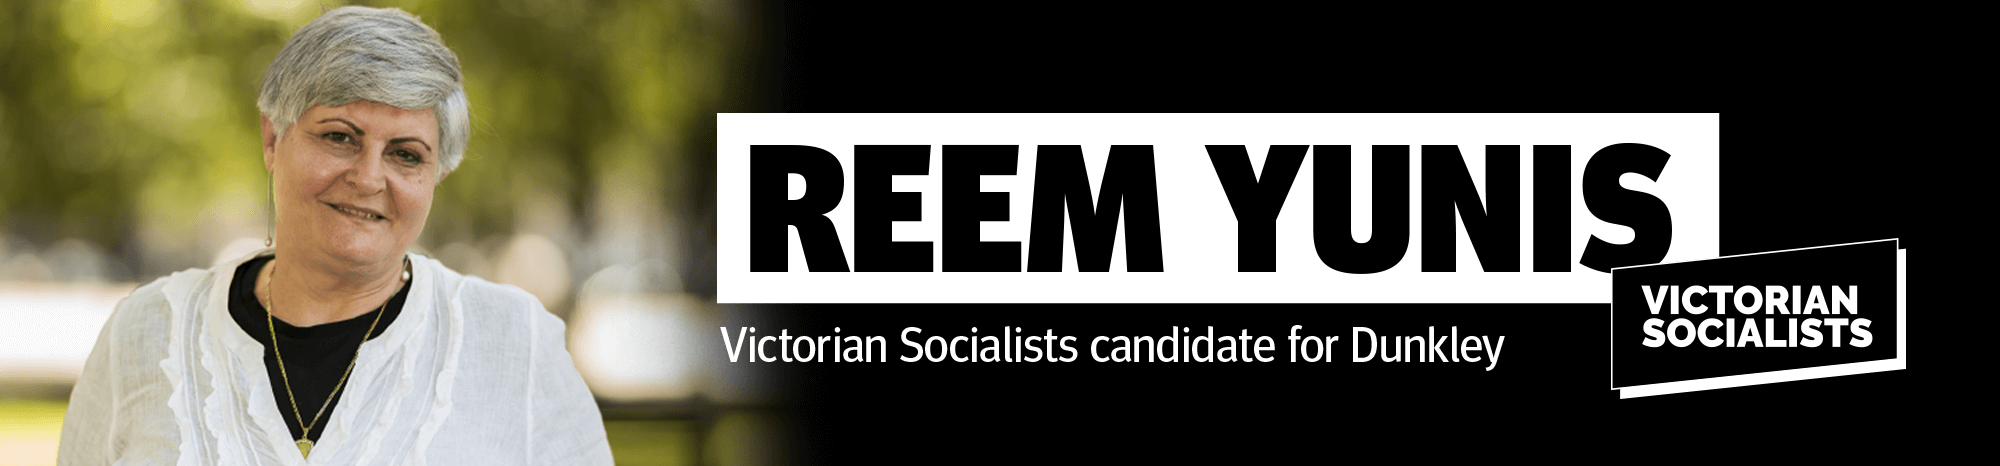 Reem Yunis, Victorian Socialists candidate for Dunkley